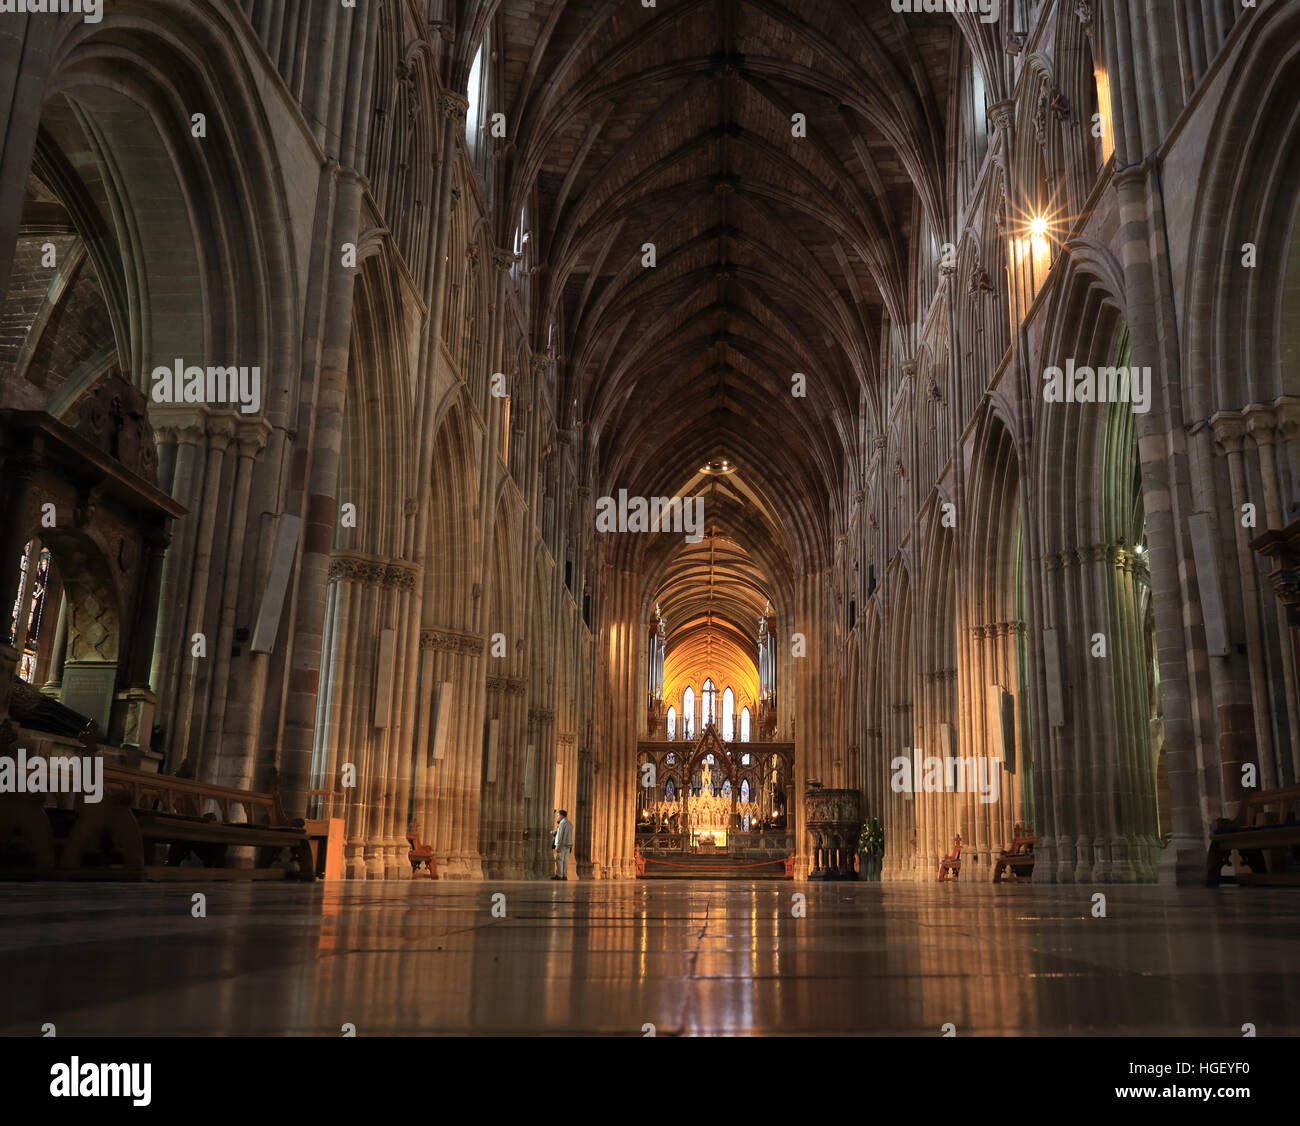 Worcester Cathedral Interieur, Worcestershire, England, UK. Stockfoto